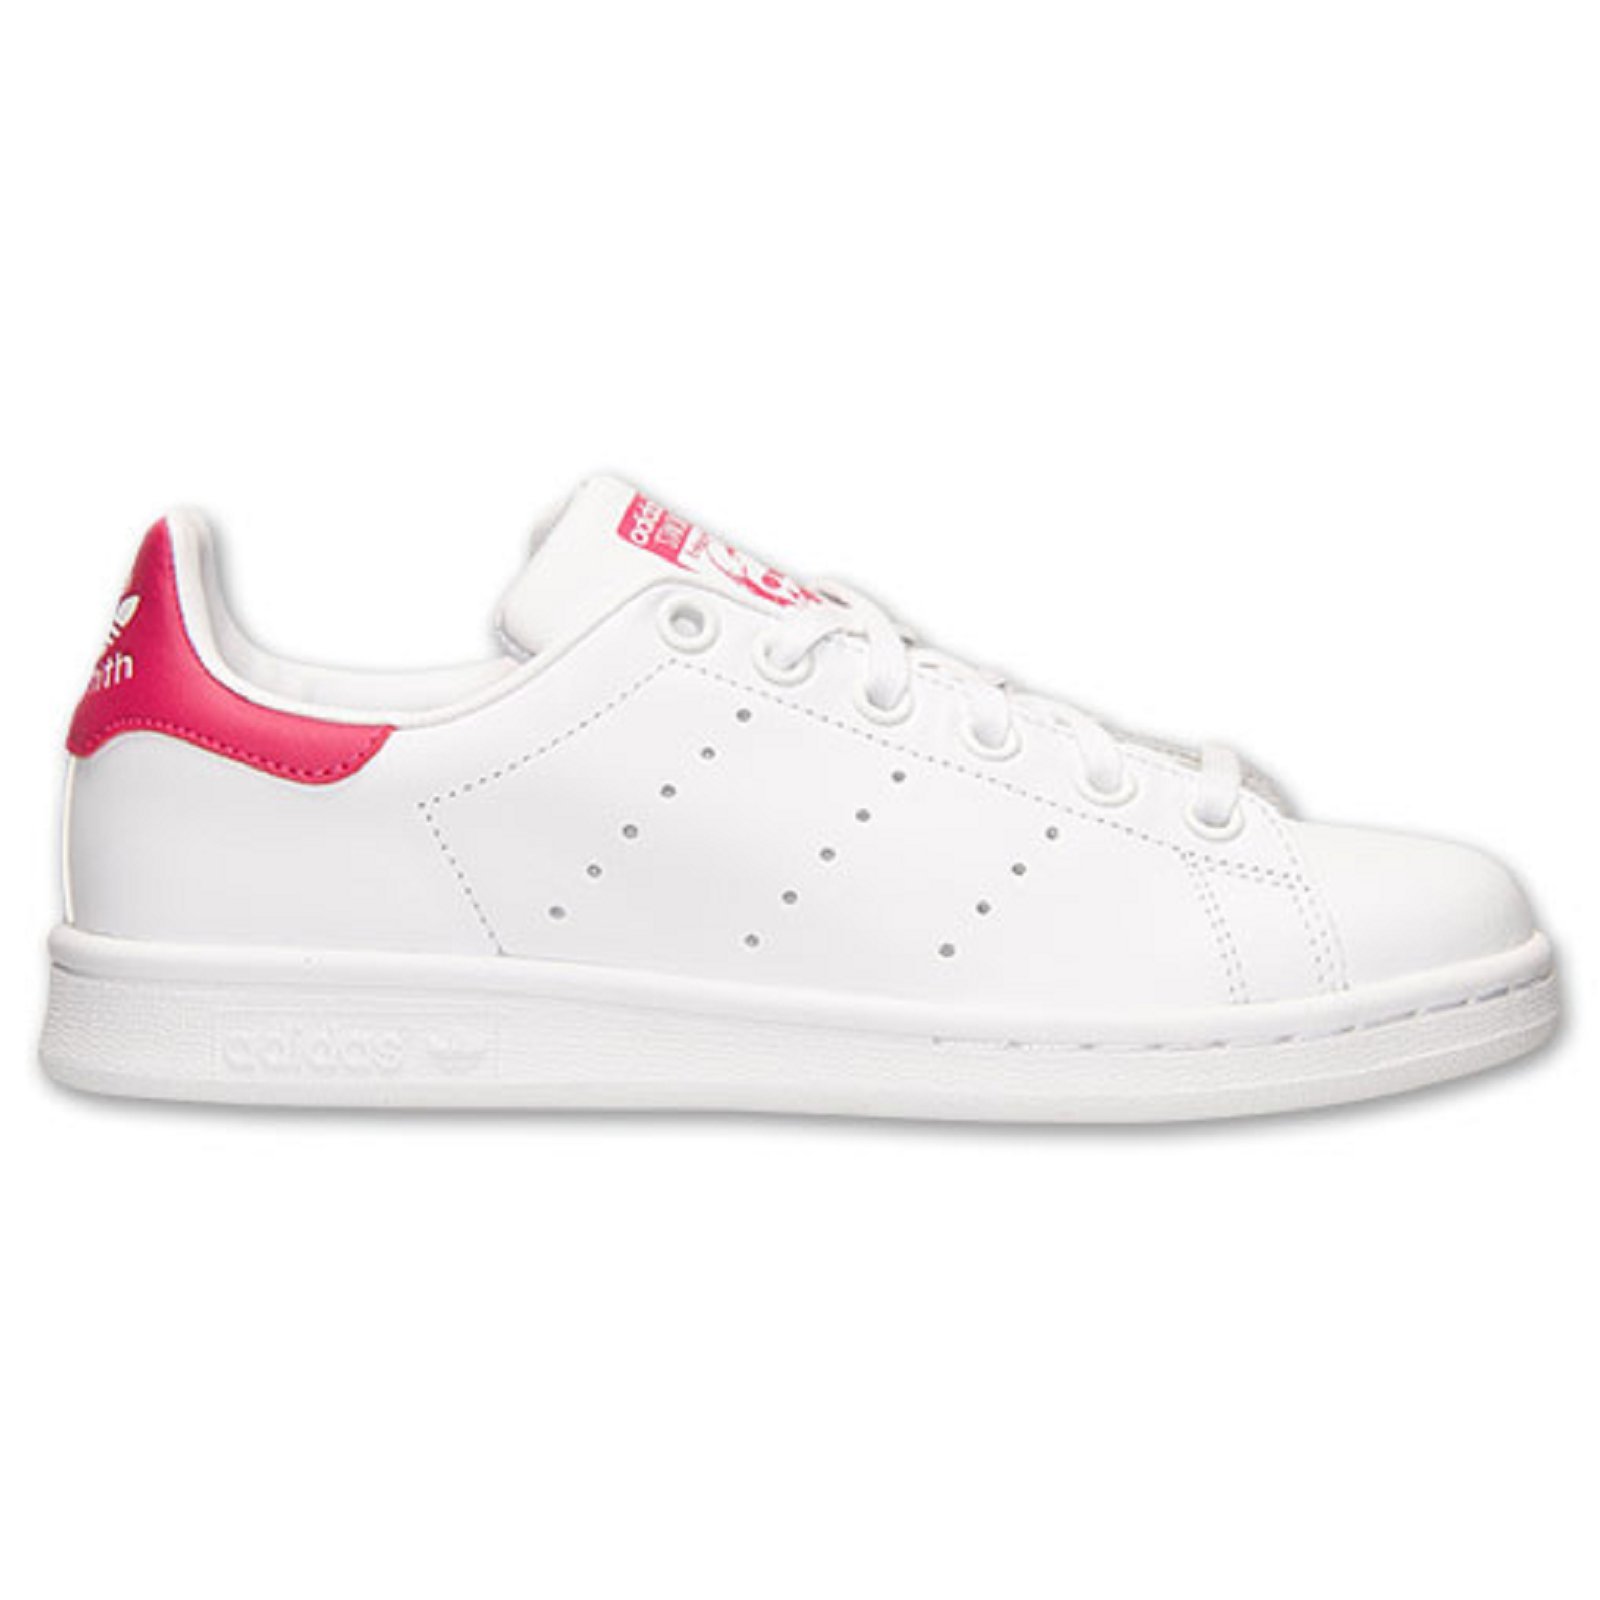 stan smith taille 40 femme online